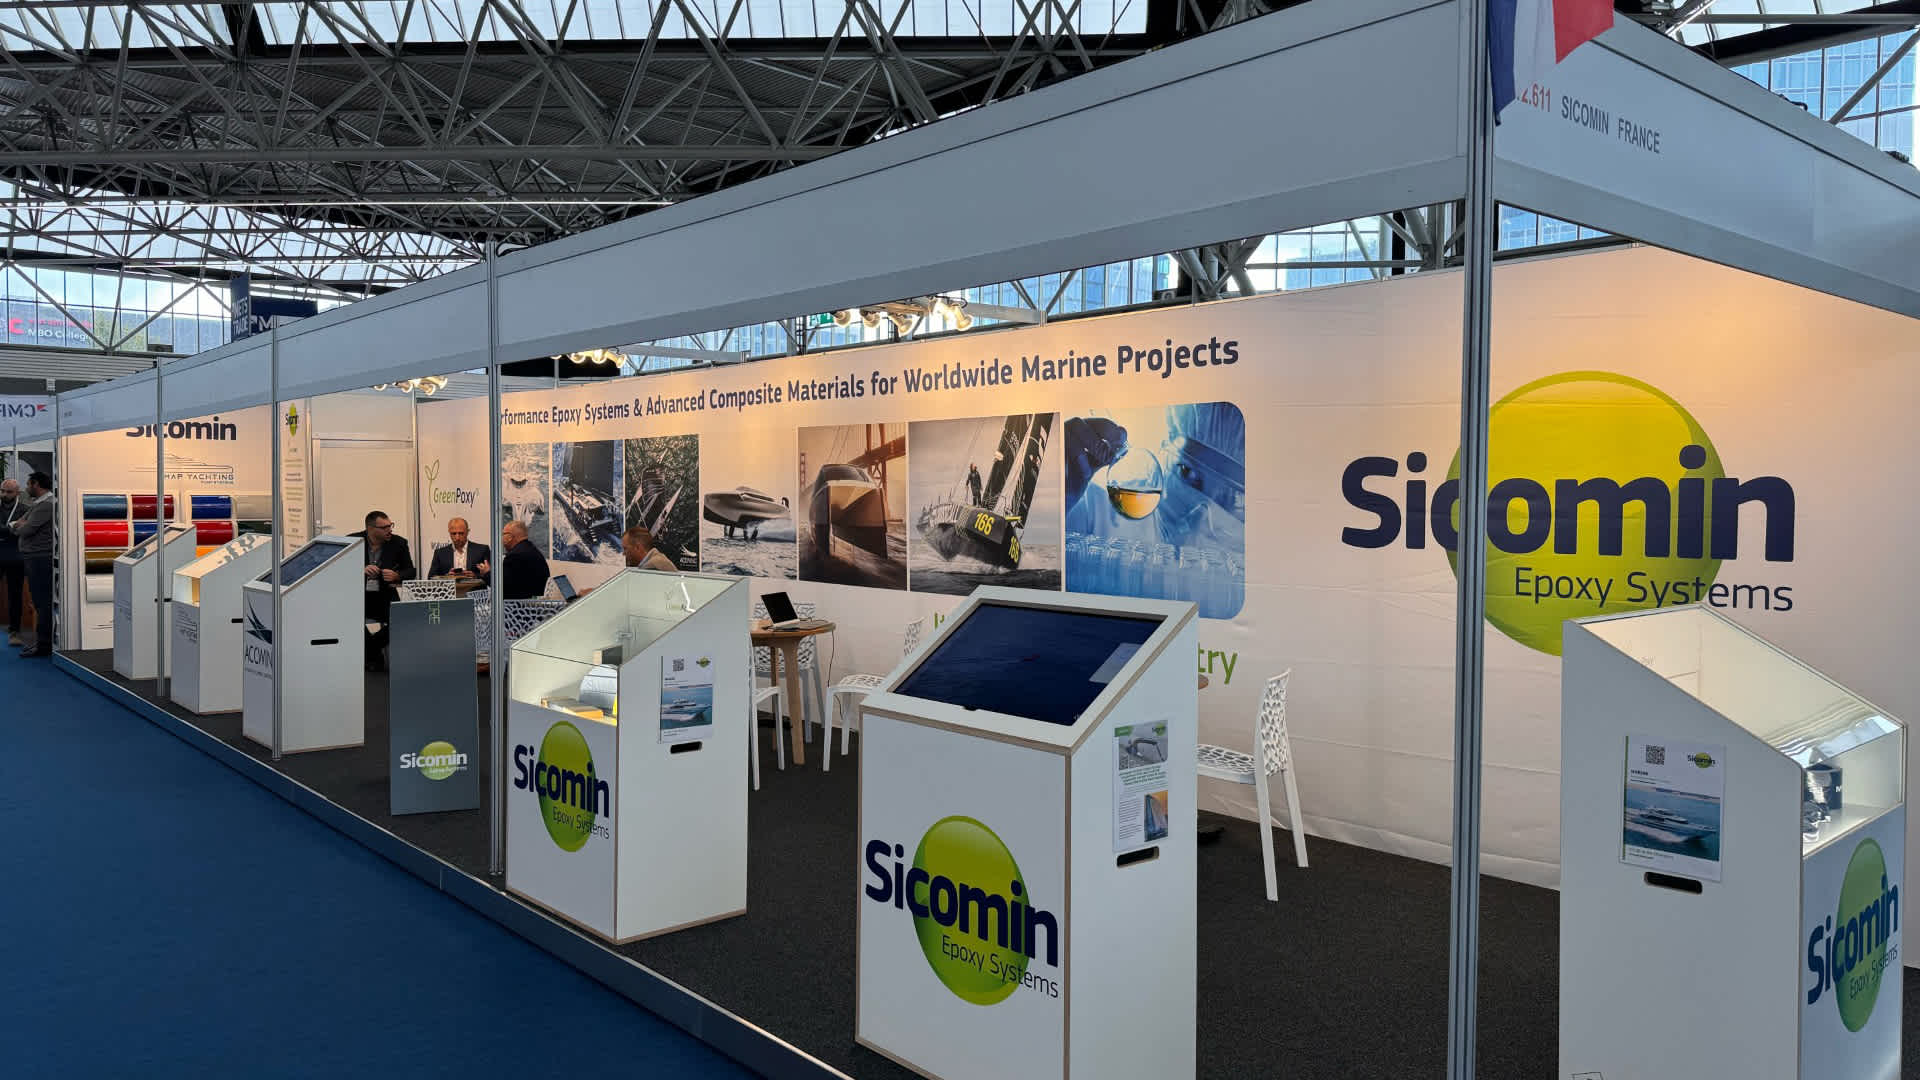 Sicomin event stand